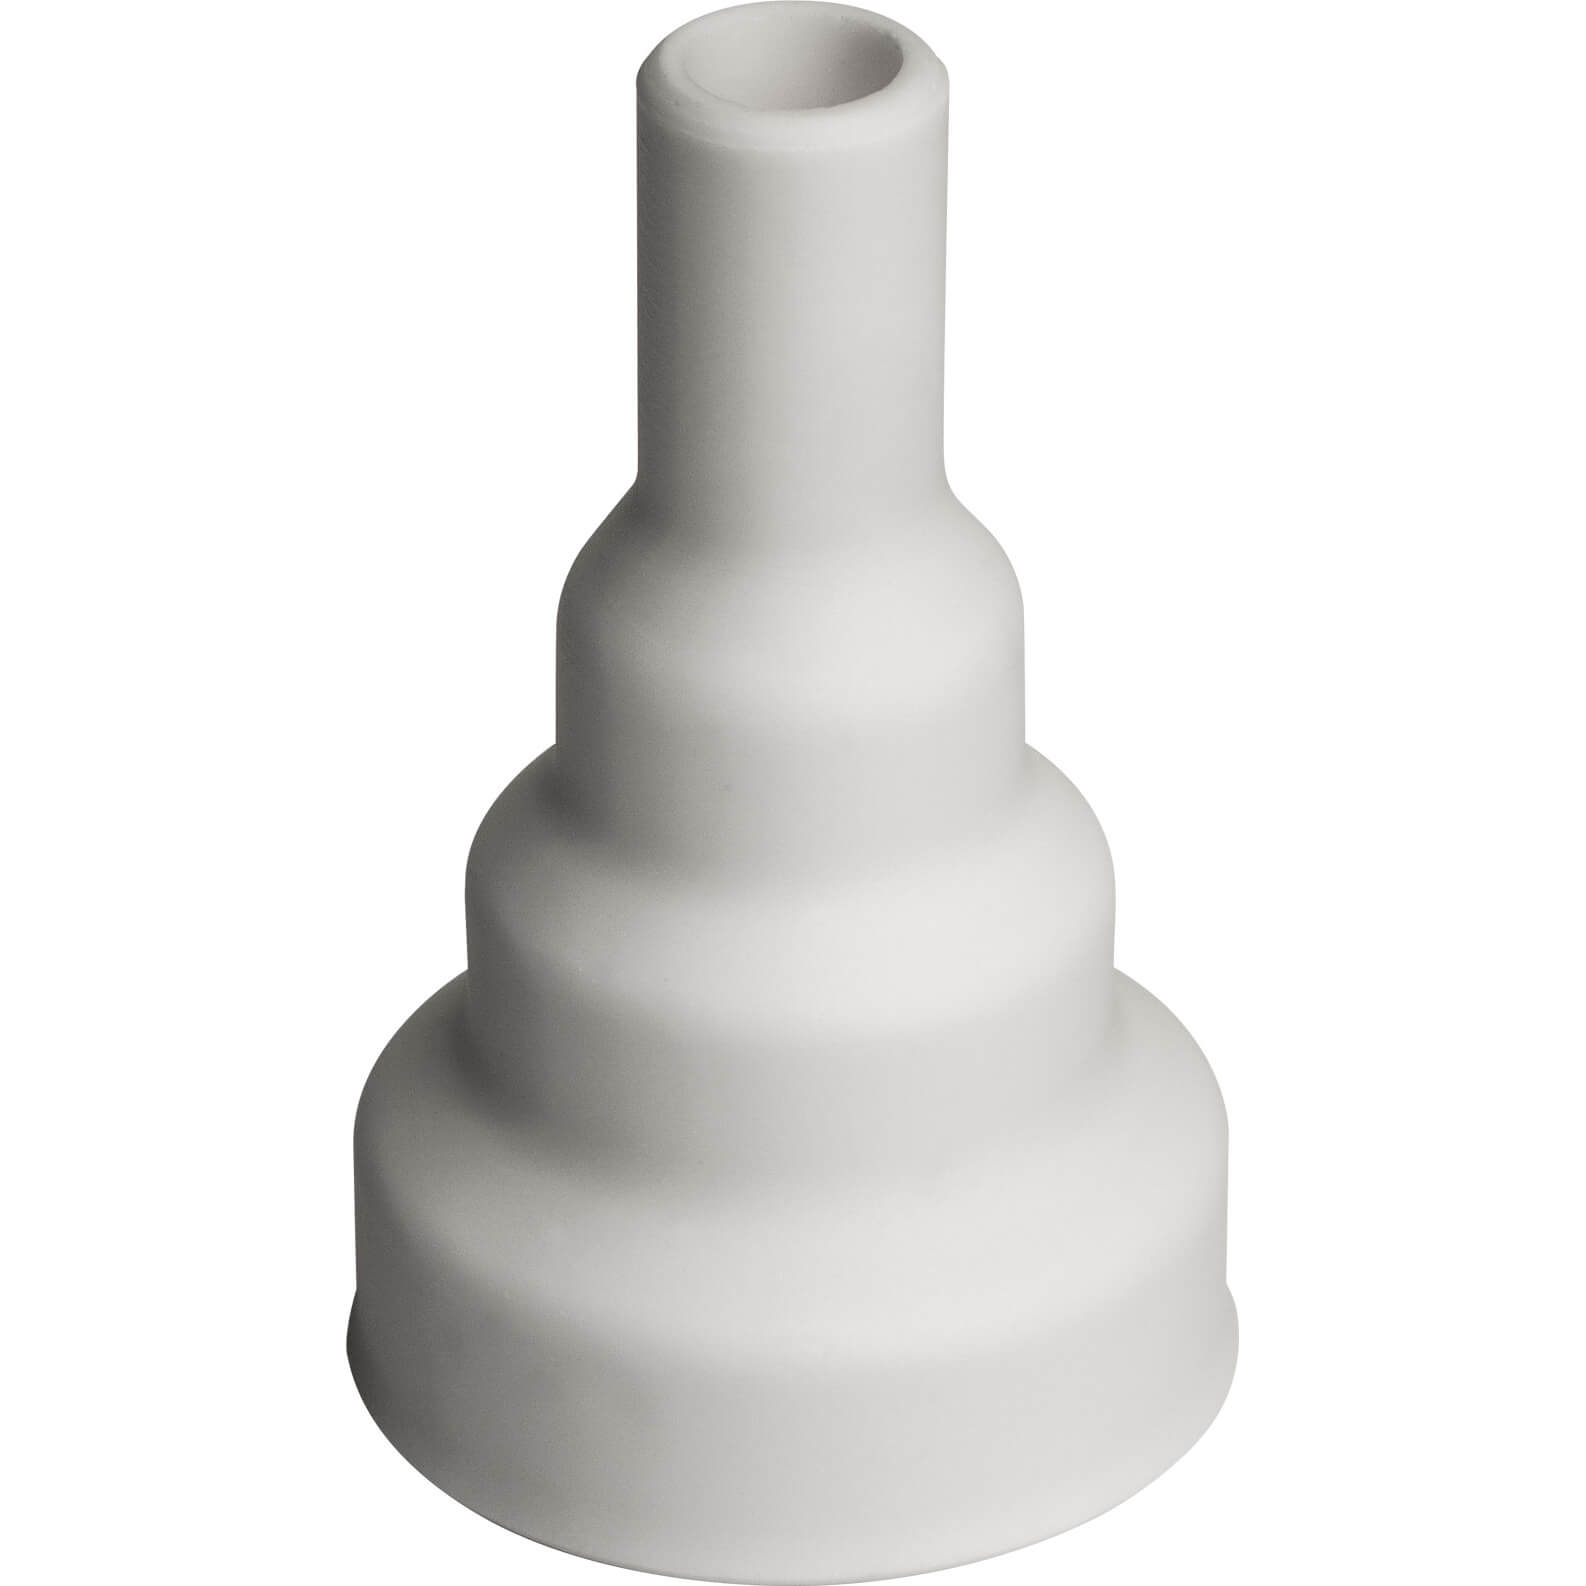 Steinel Ceramic Nozzle for HL Models and HG 2120 E, 2320 E and 2220 E 9mm